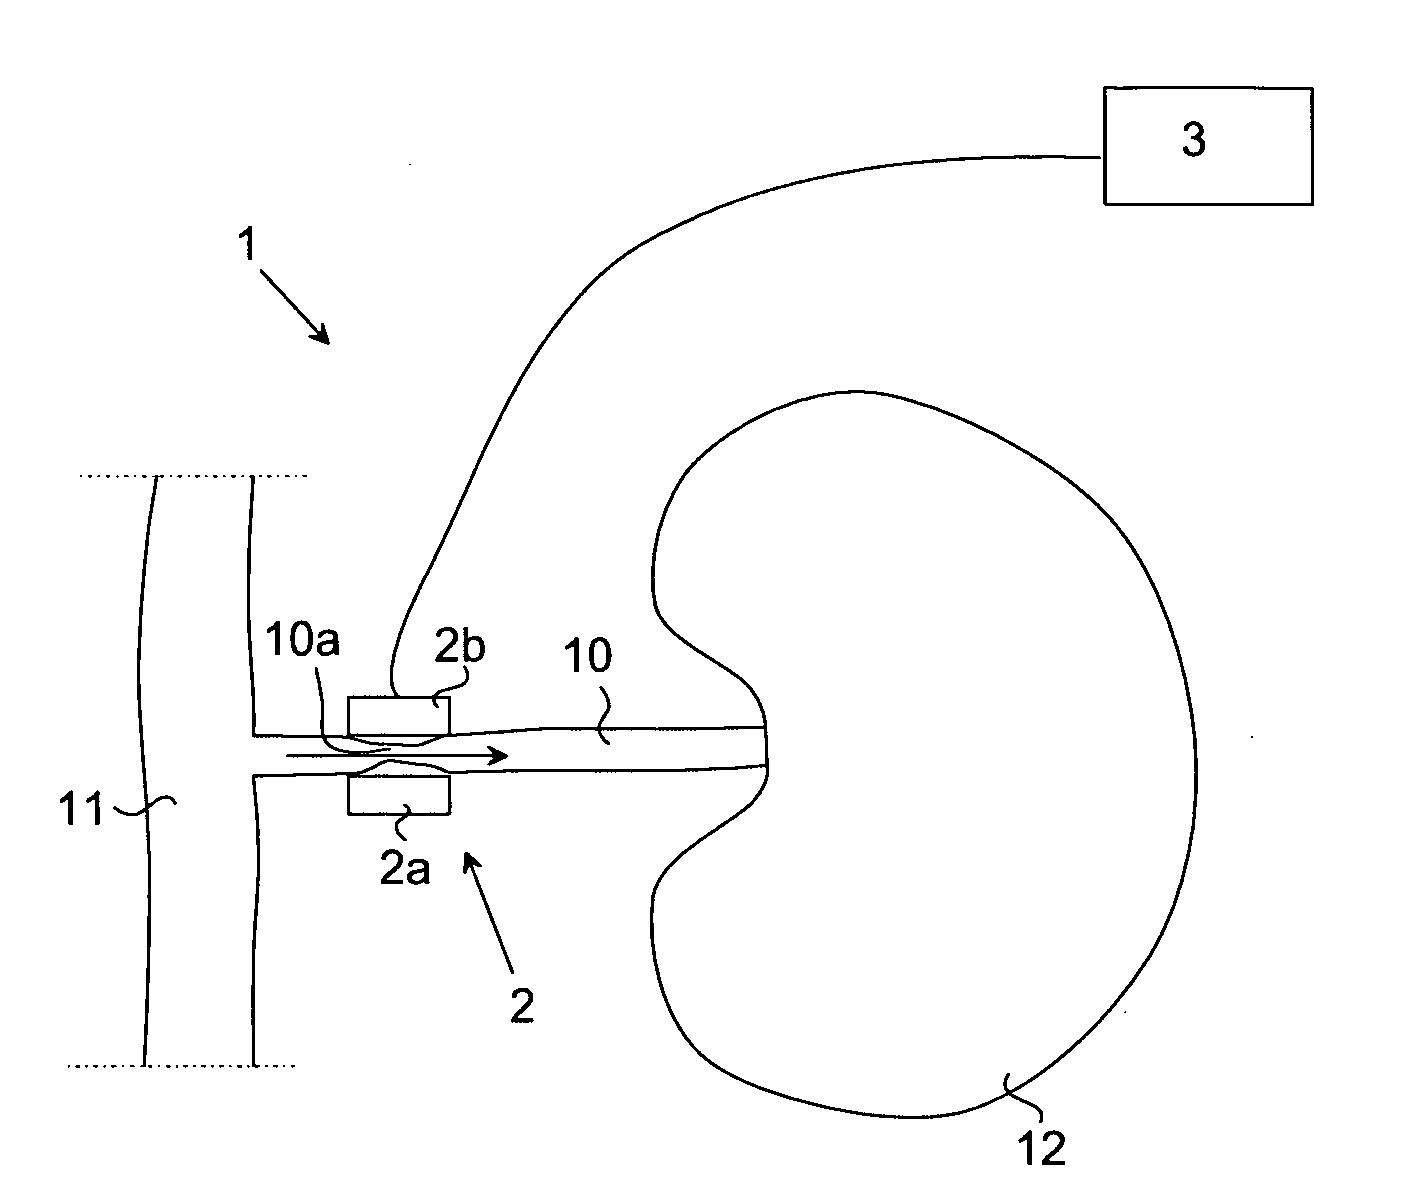 System and method for thermal treatment of hypertension, hypotension or aneurysm